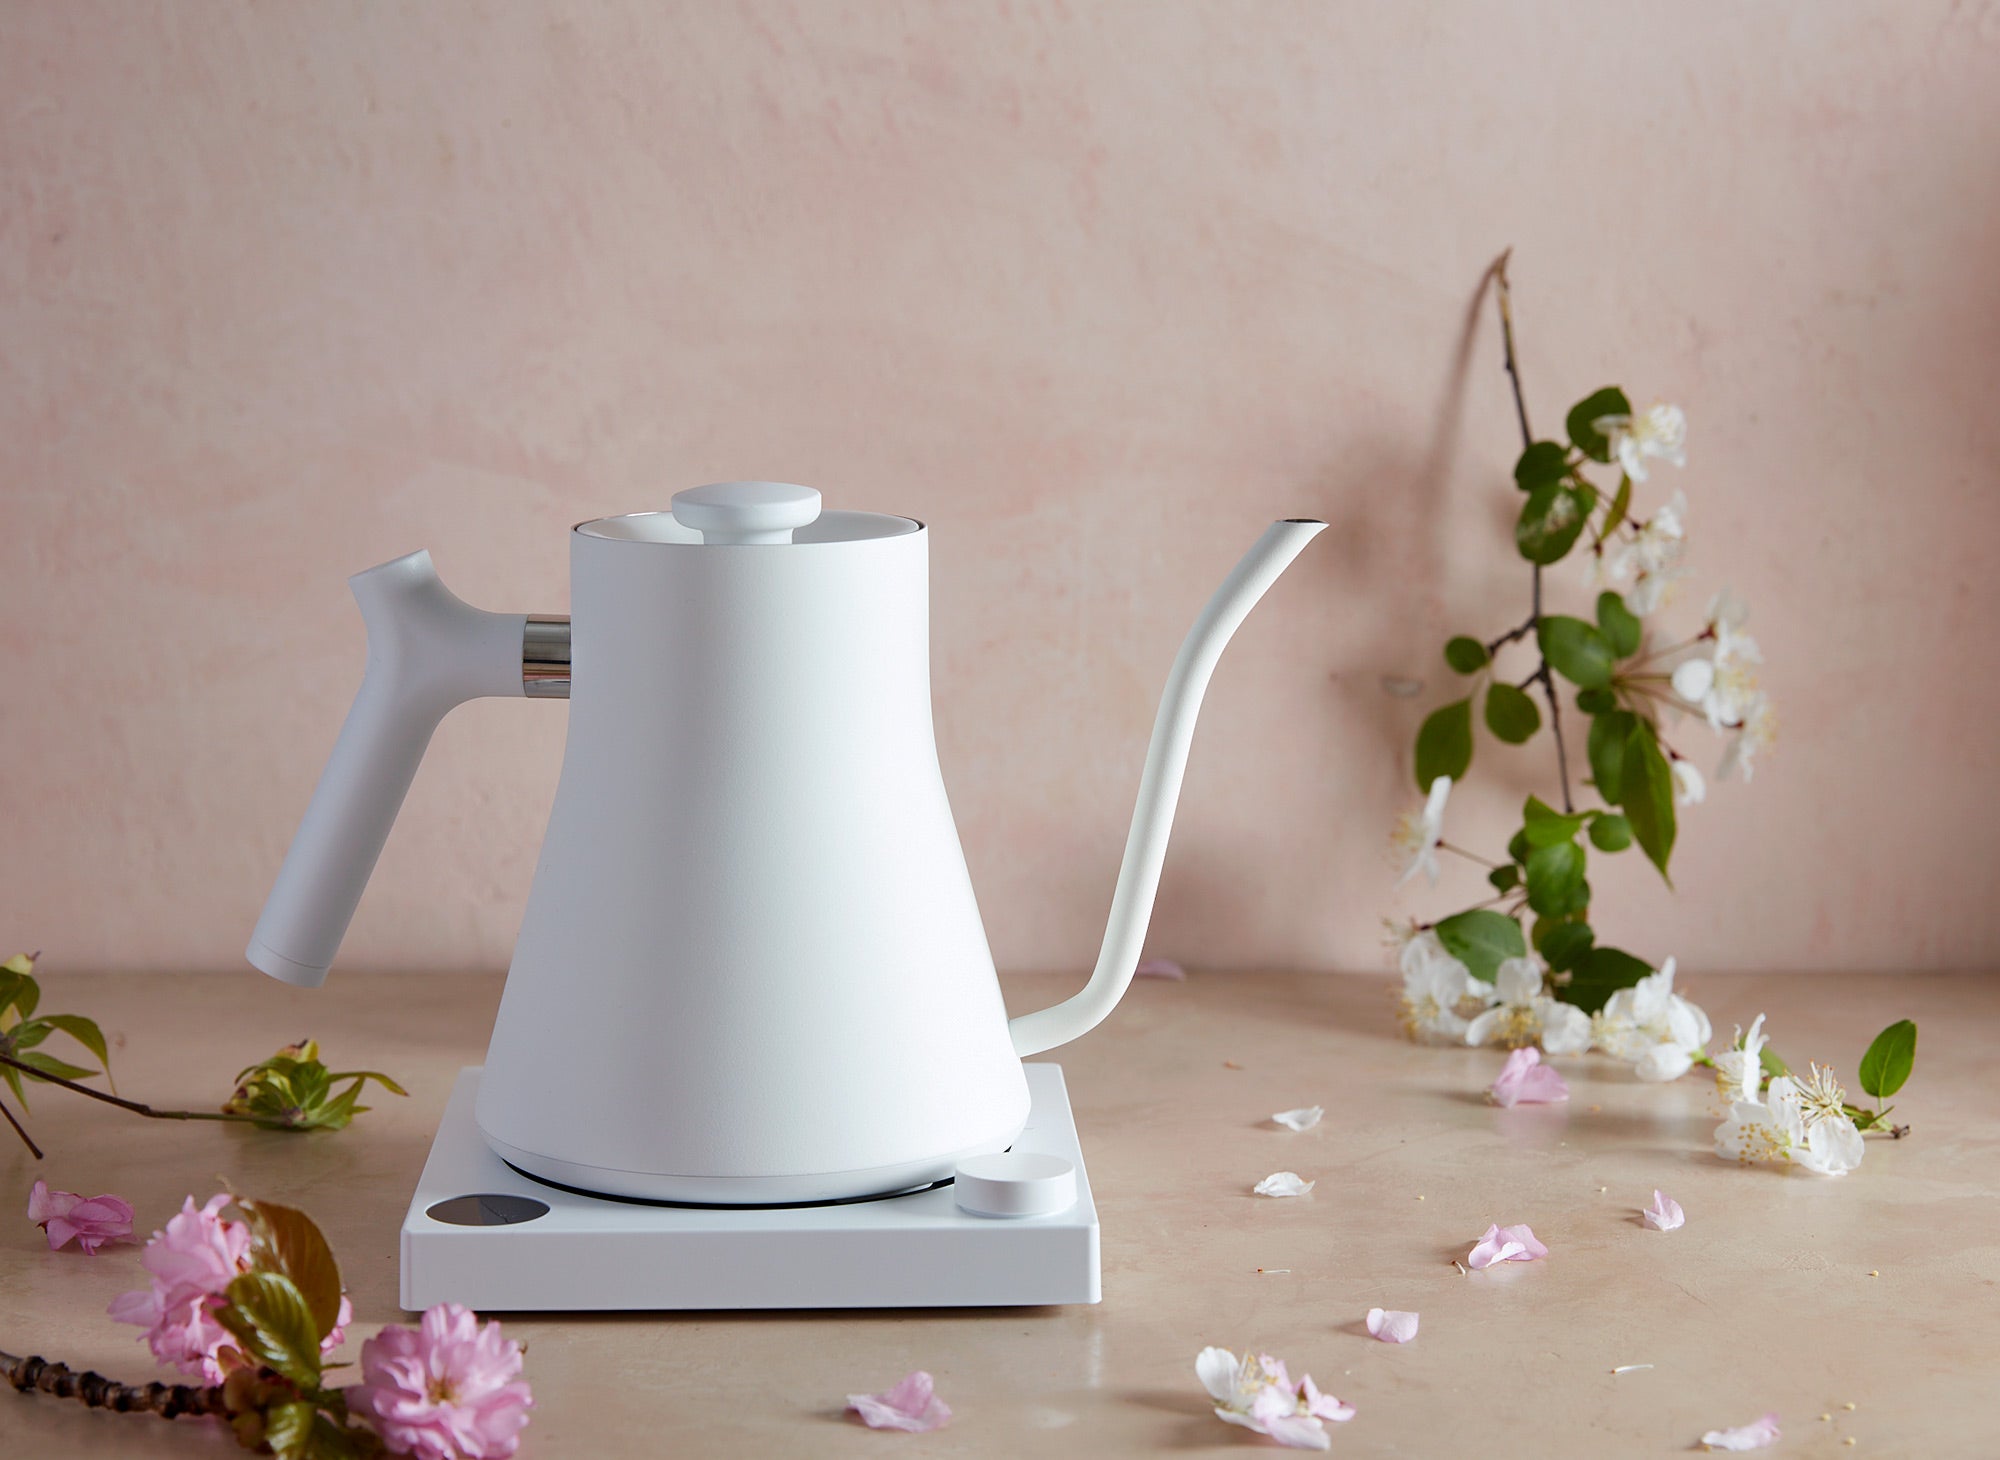 Shop luxury tea kettles from BELLOCQ and discover your new tea ritual. Explore designer kettles from the finest artisans in the world.